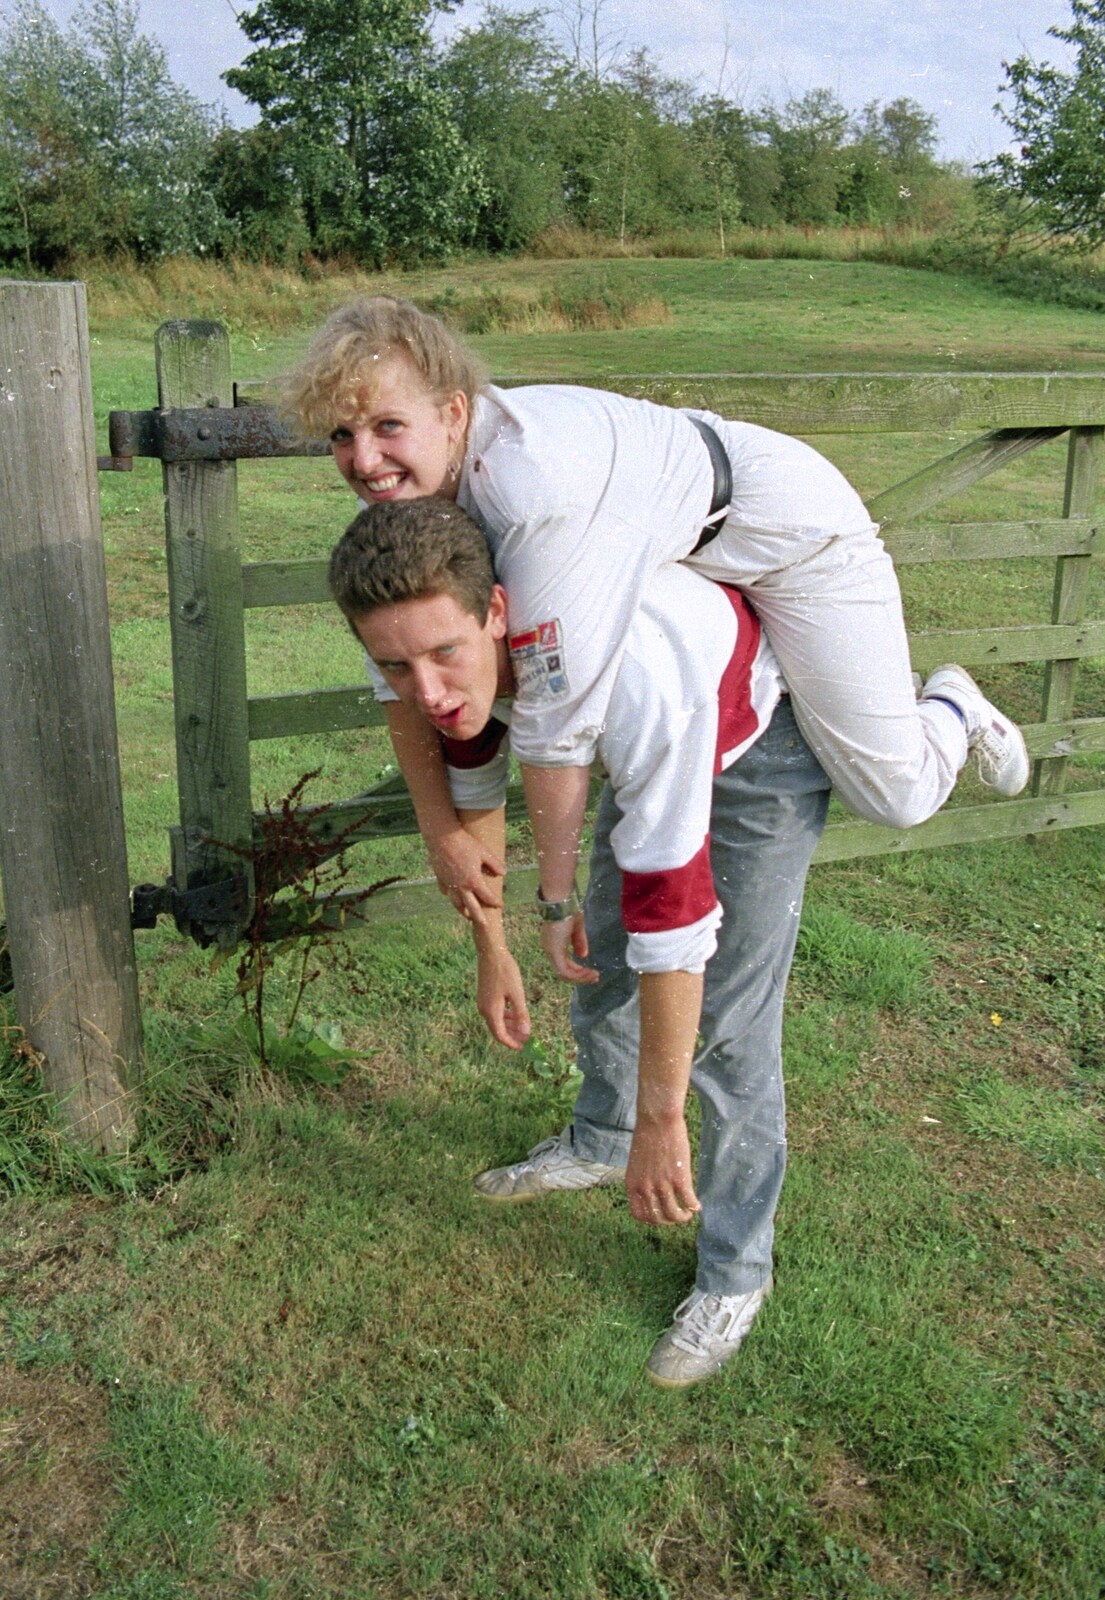 Donna goes piggy back from A Bike Ride to Redgrave, Suffolk - 11th August 1990